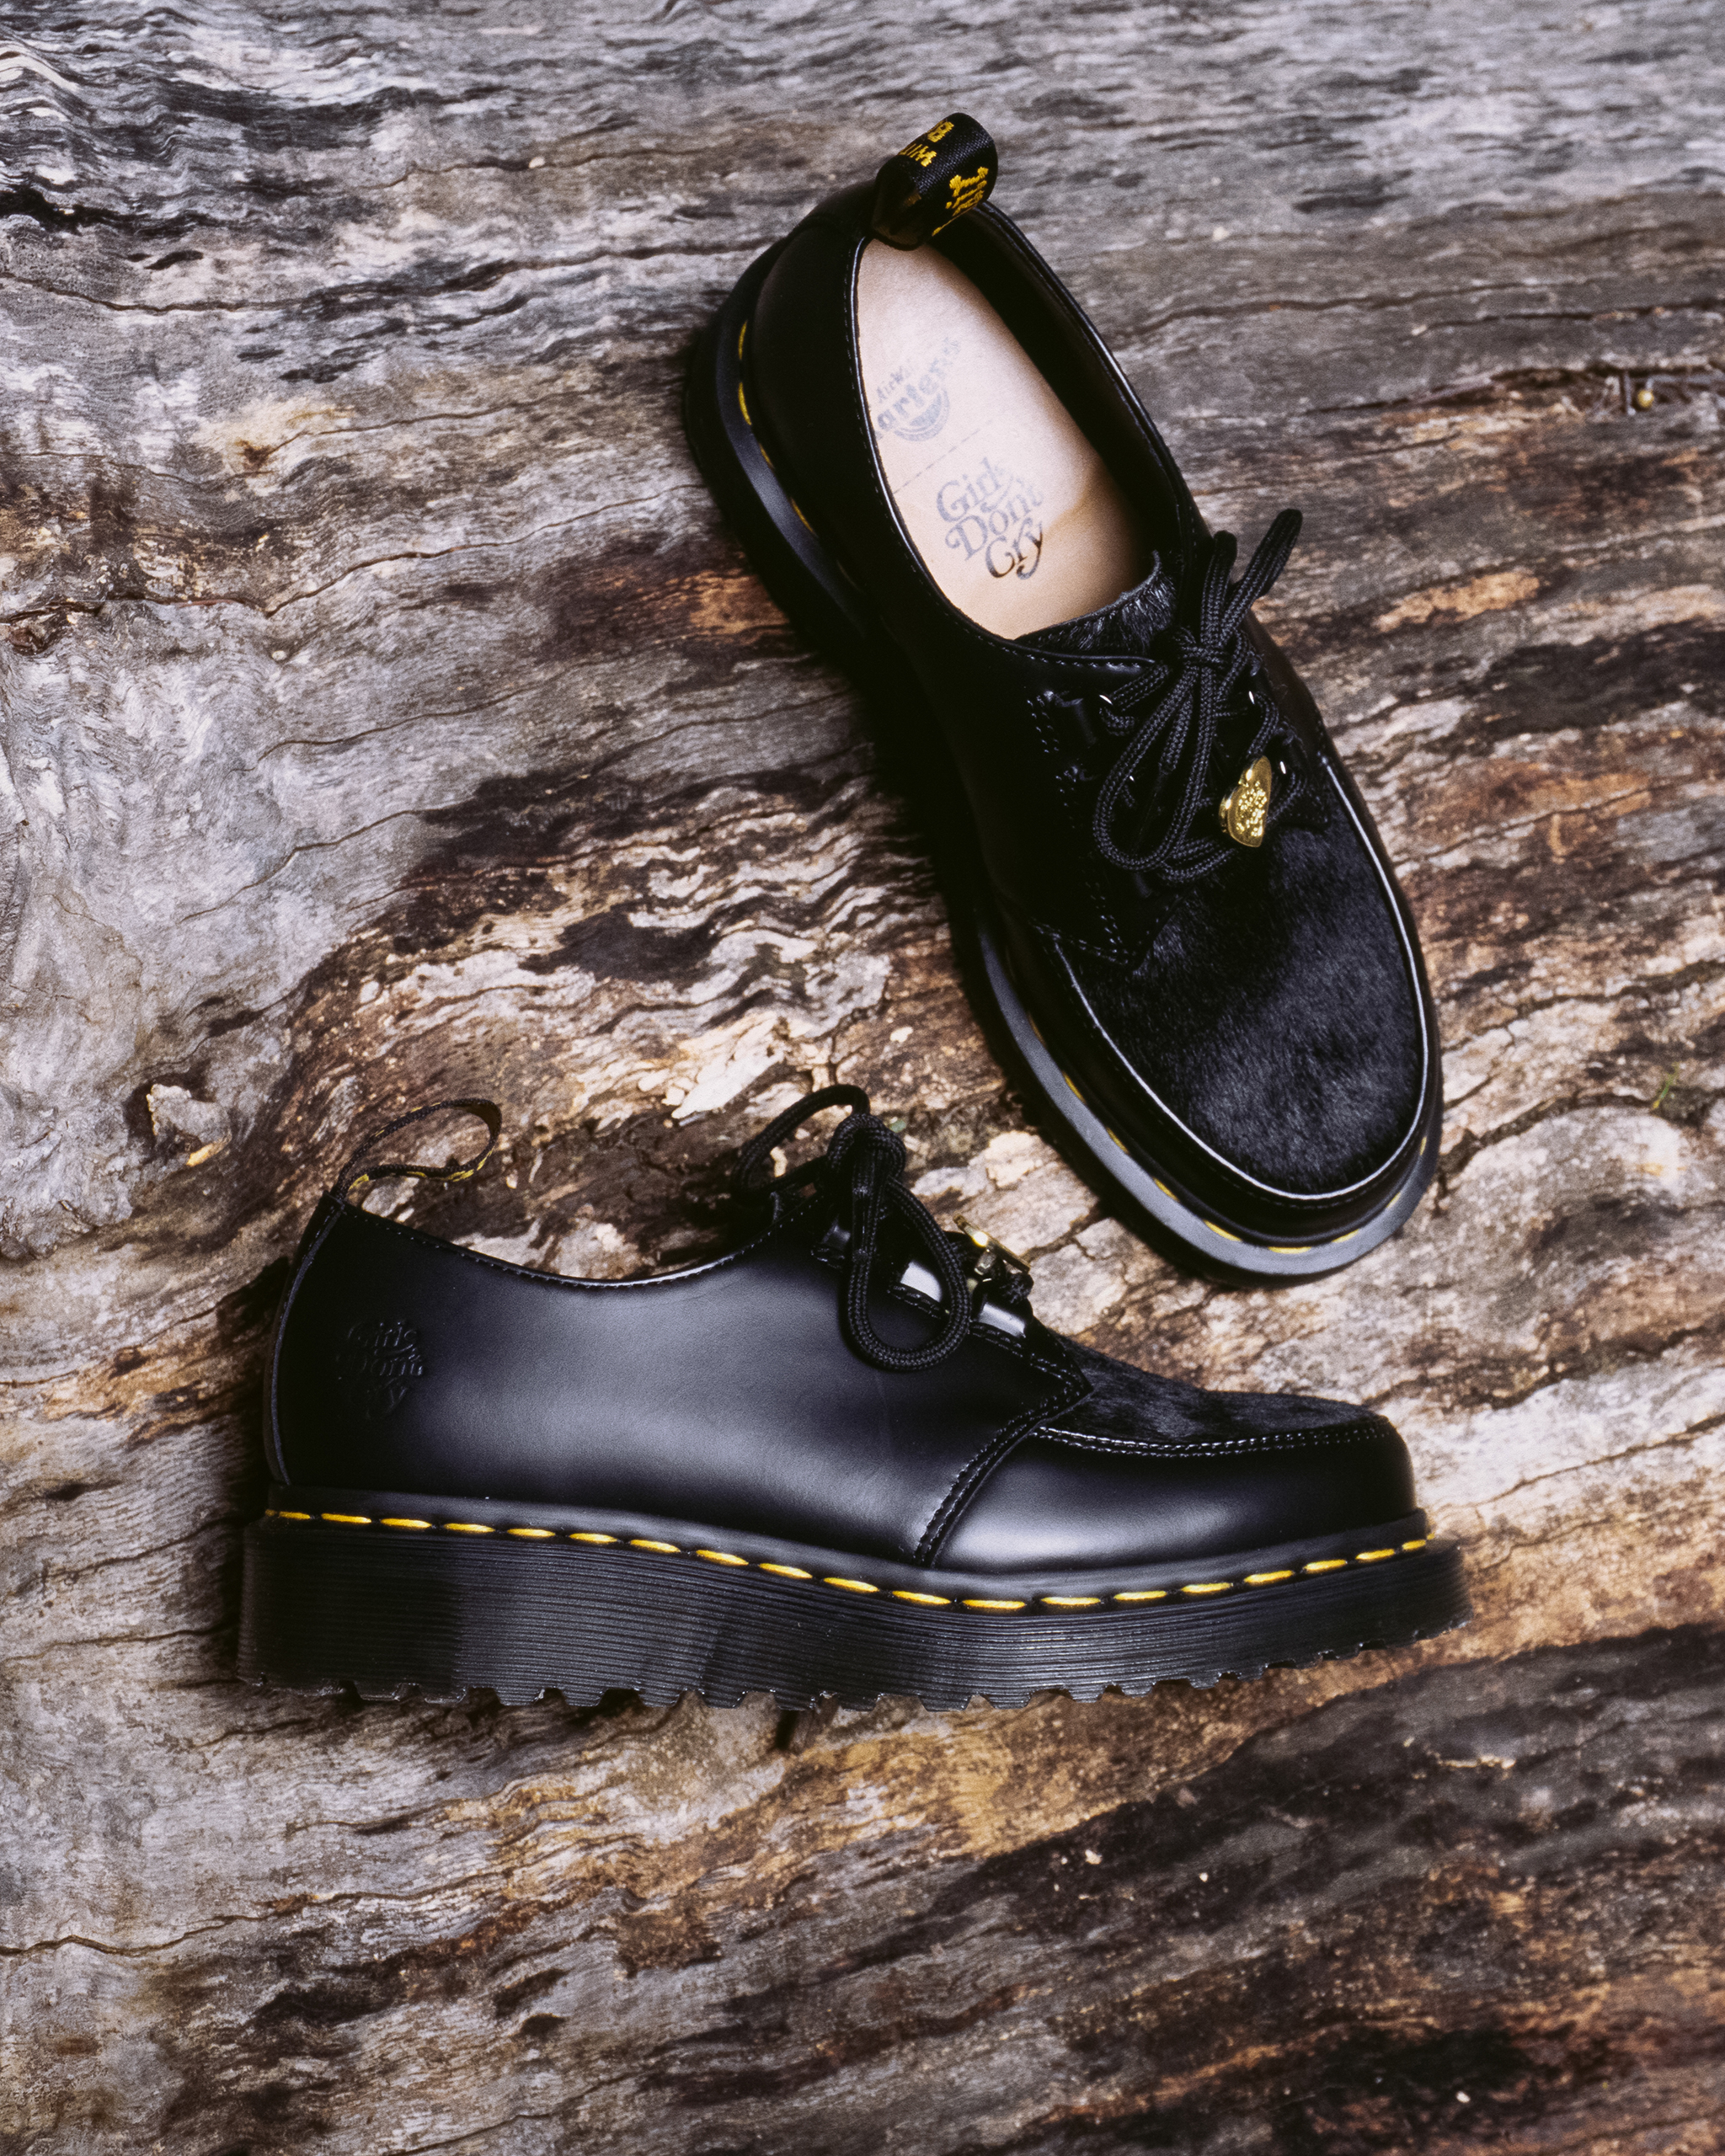 Dr. Martens x Girls Don't Cry - Fashion Trendsetter